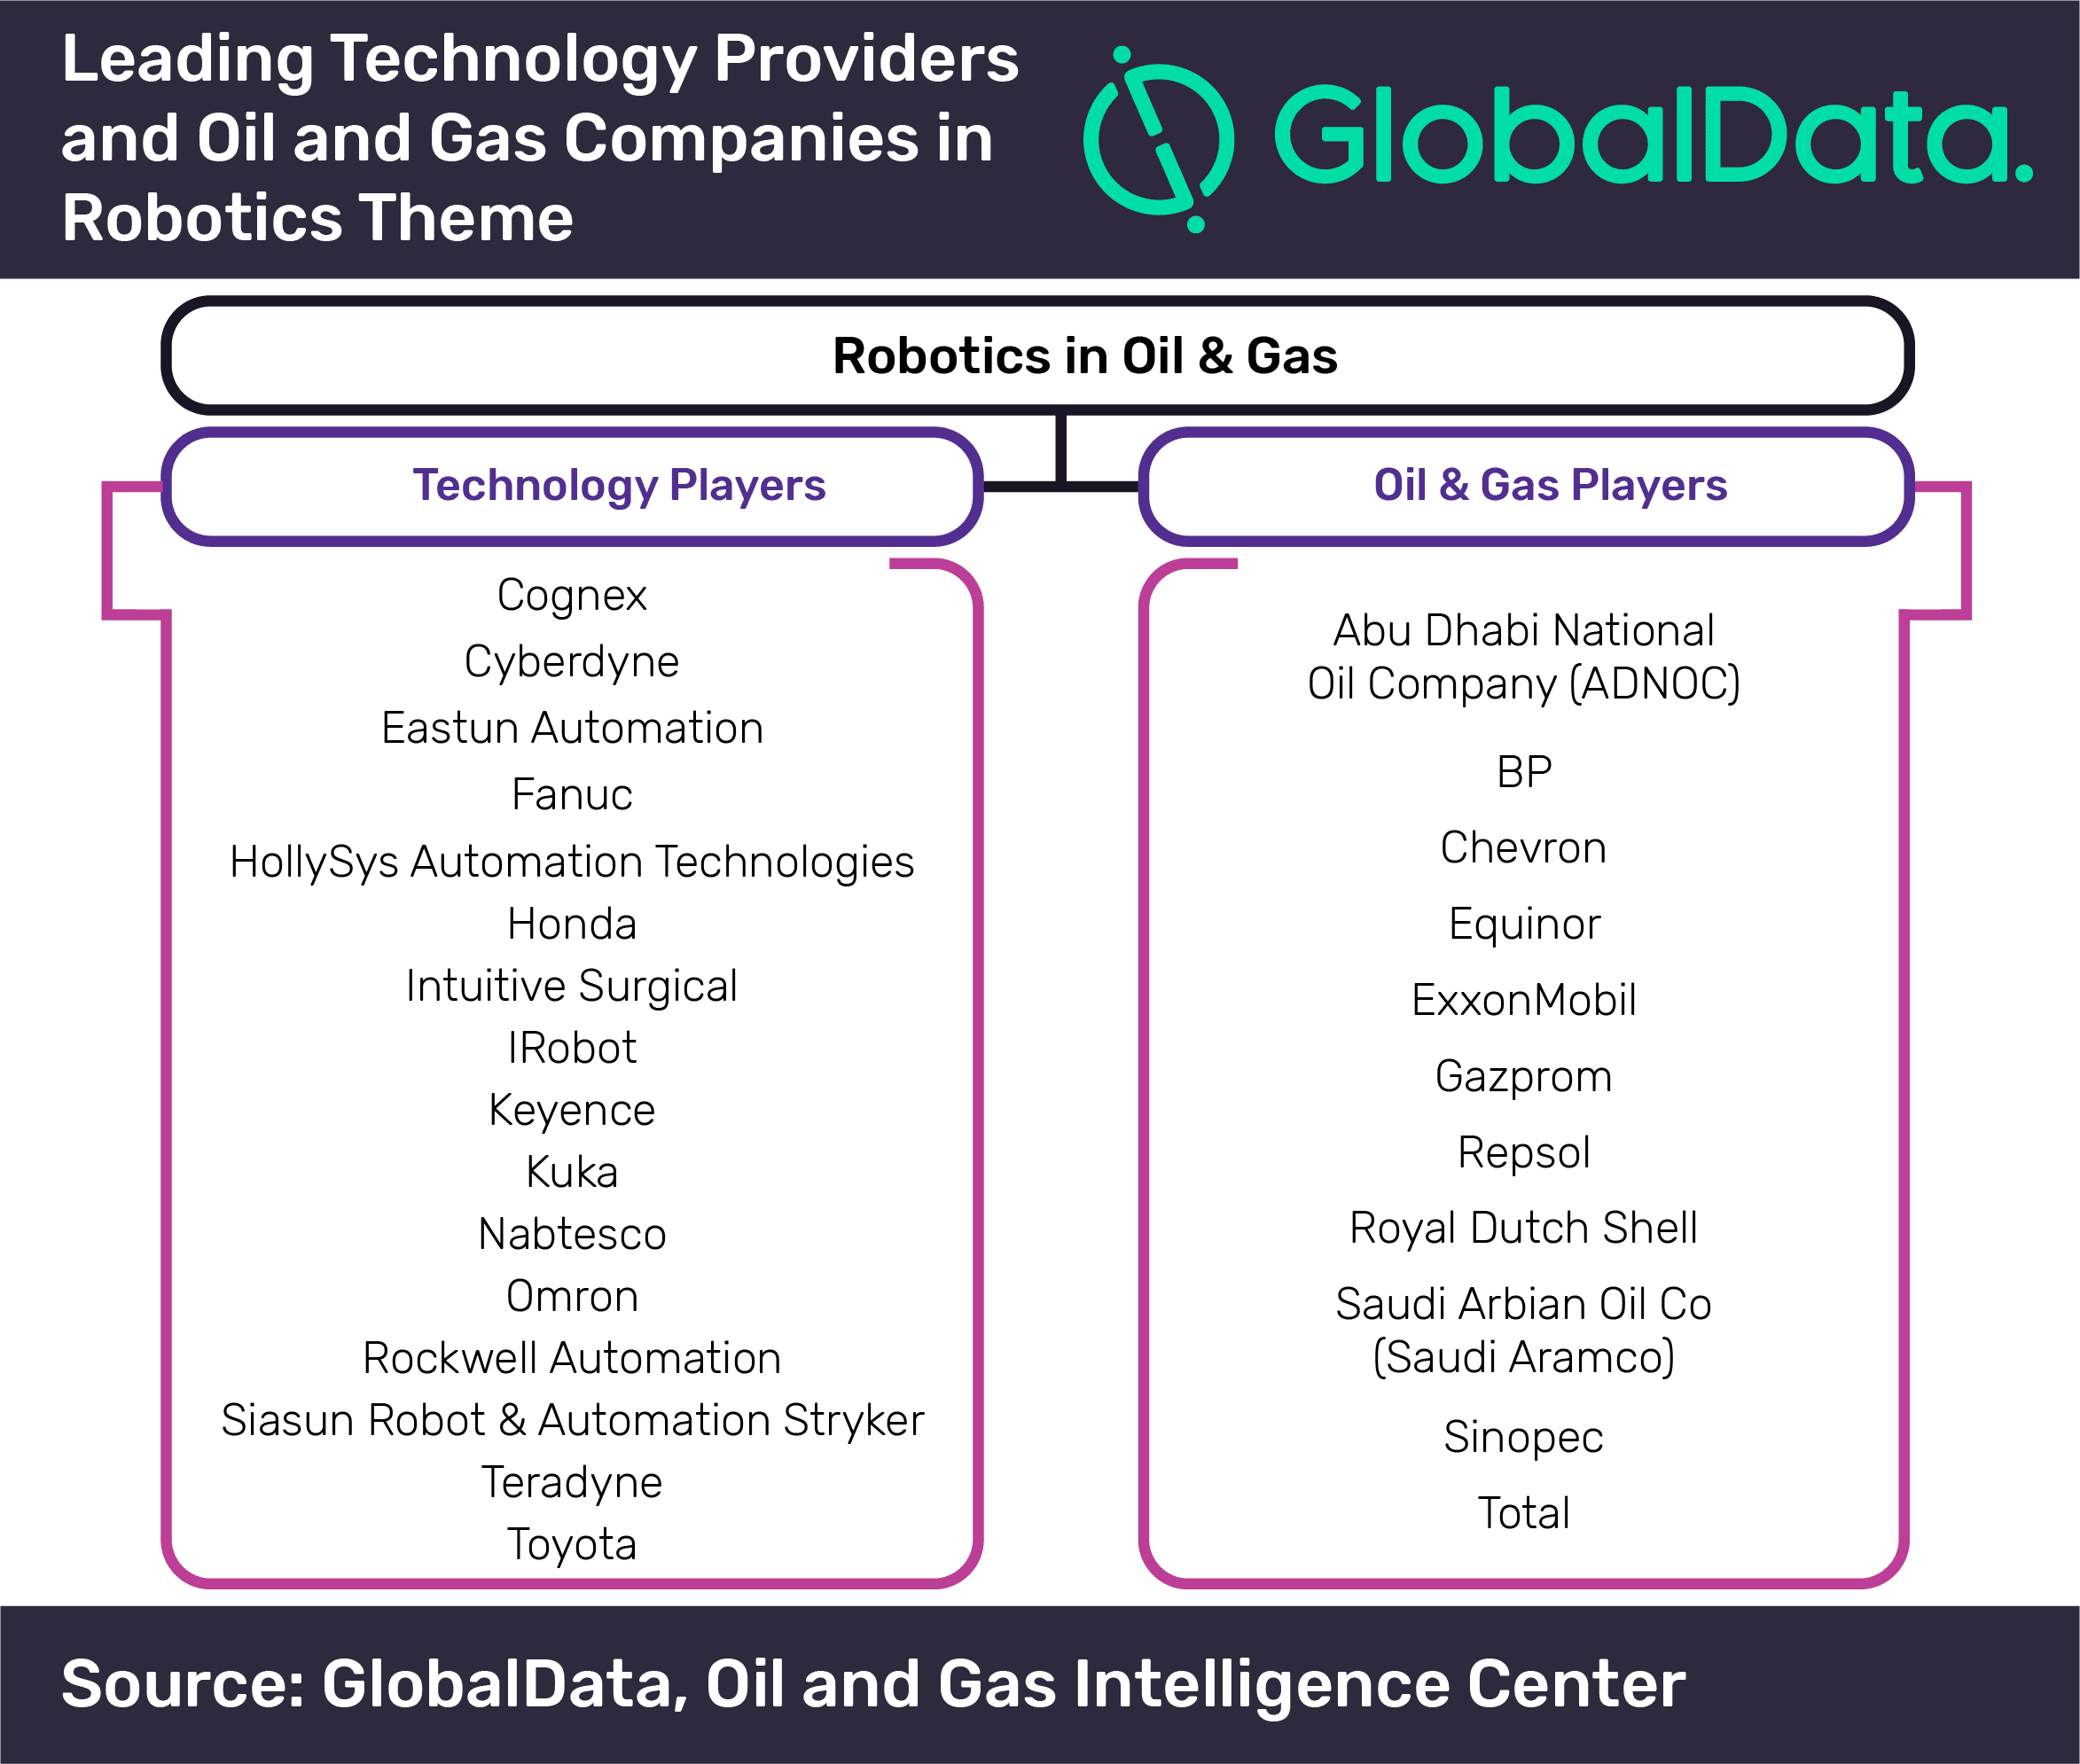 Oil and gas industry gearing up for robotics adoption to drive productivity and efficiency, says GlobalData